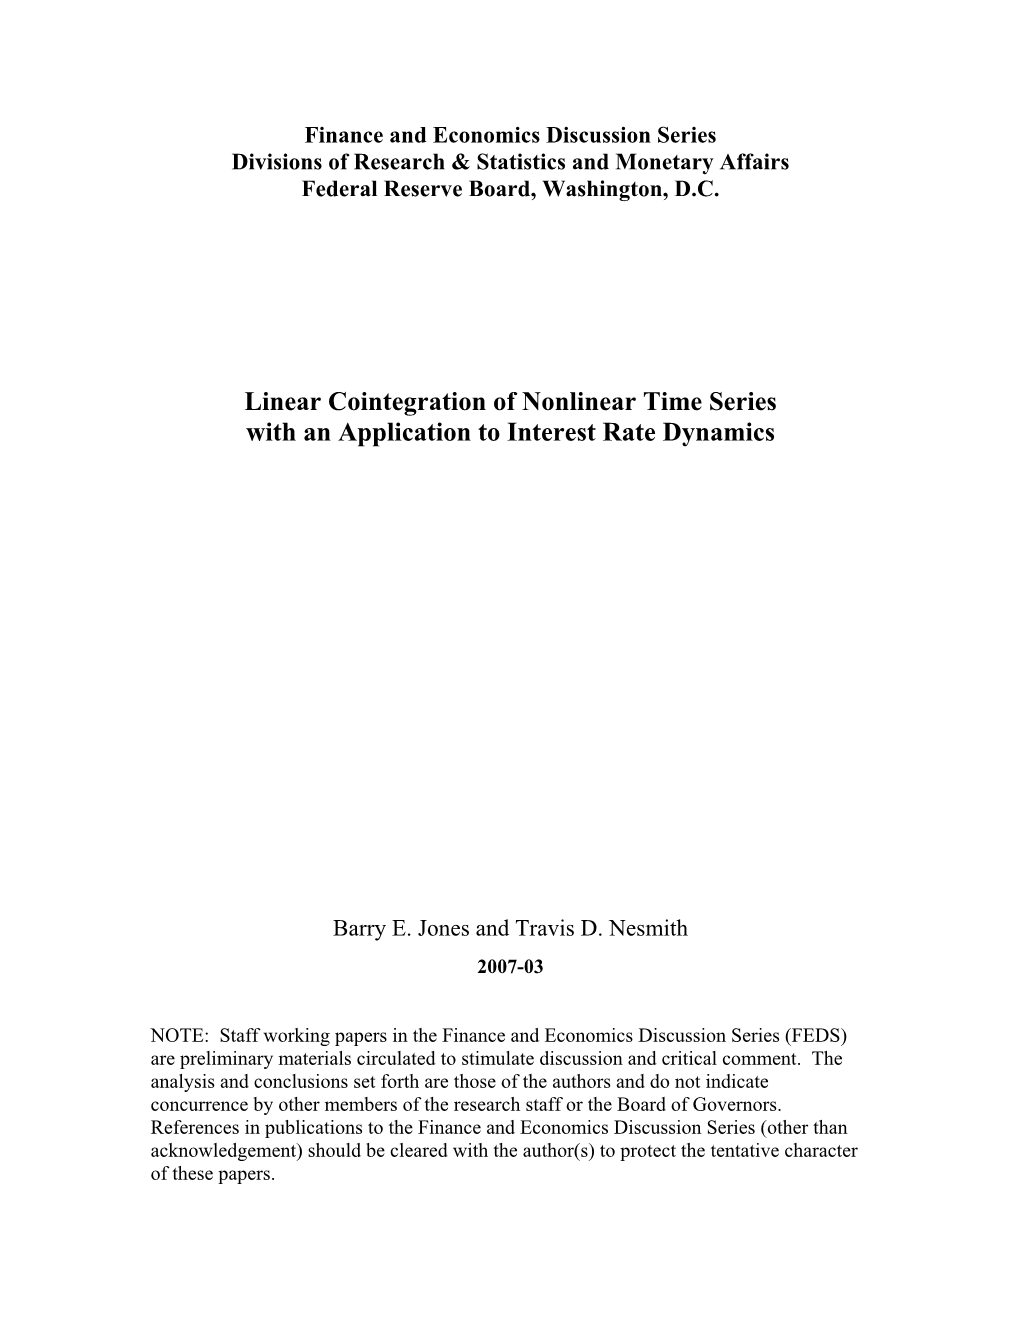 Linear Cointegration of Nonlinear Time Series with an Application to Interest Rate Dynamics